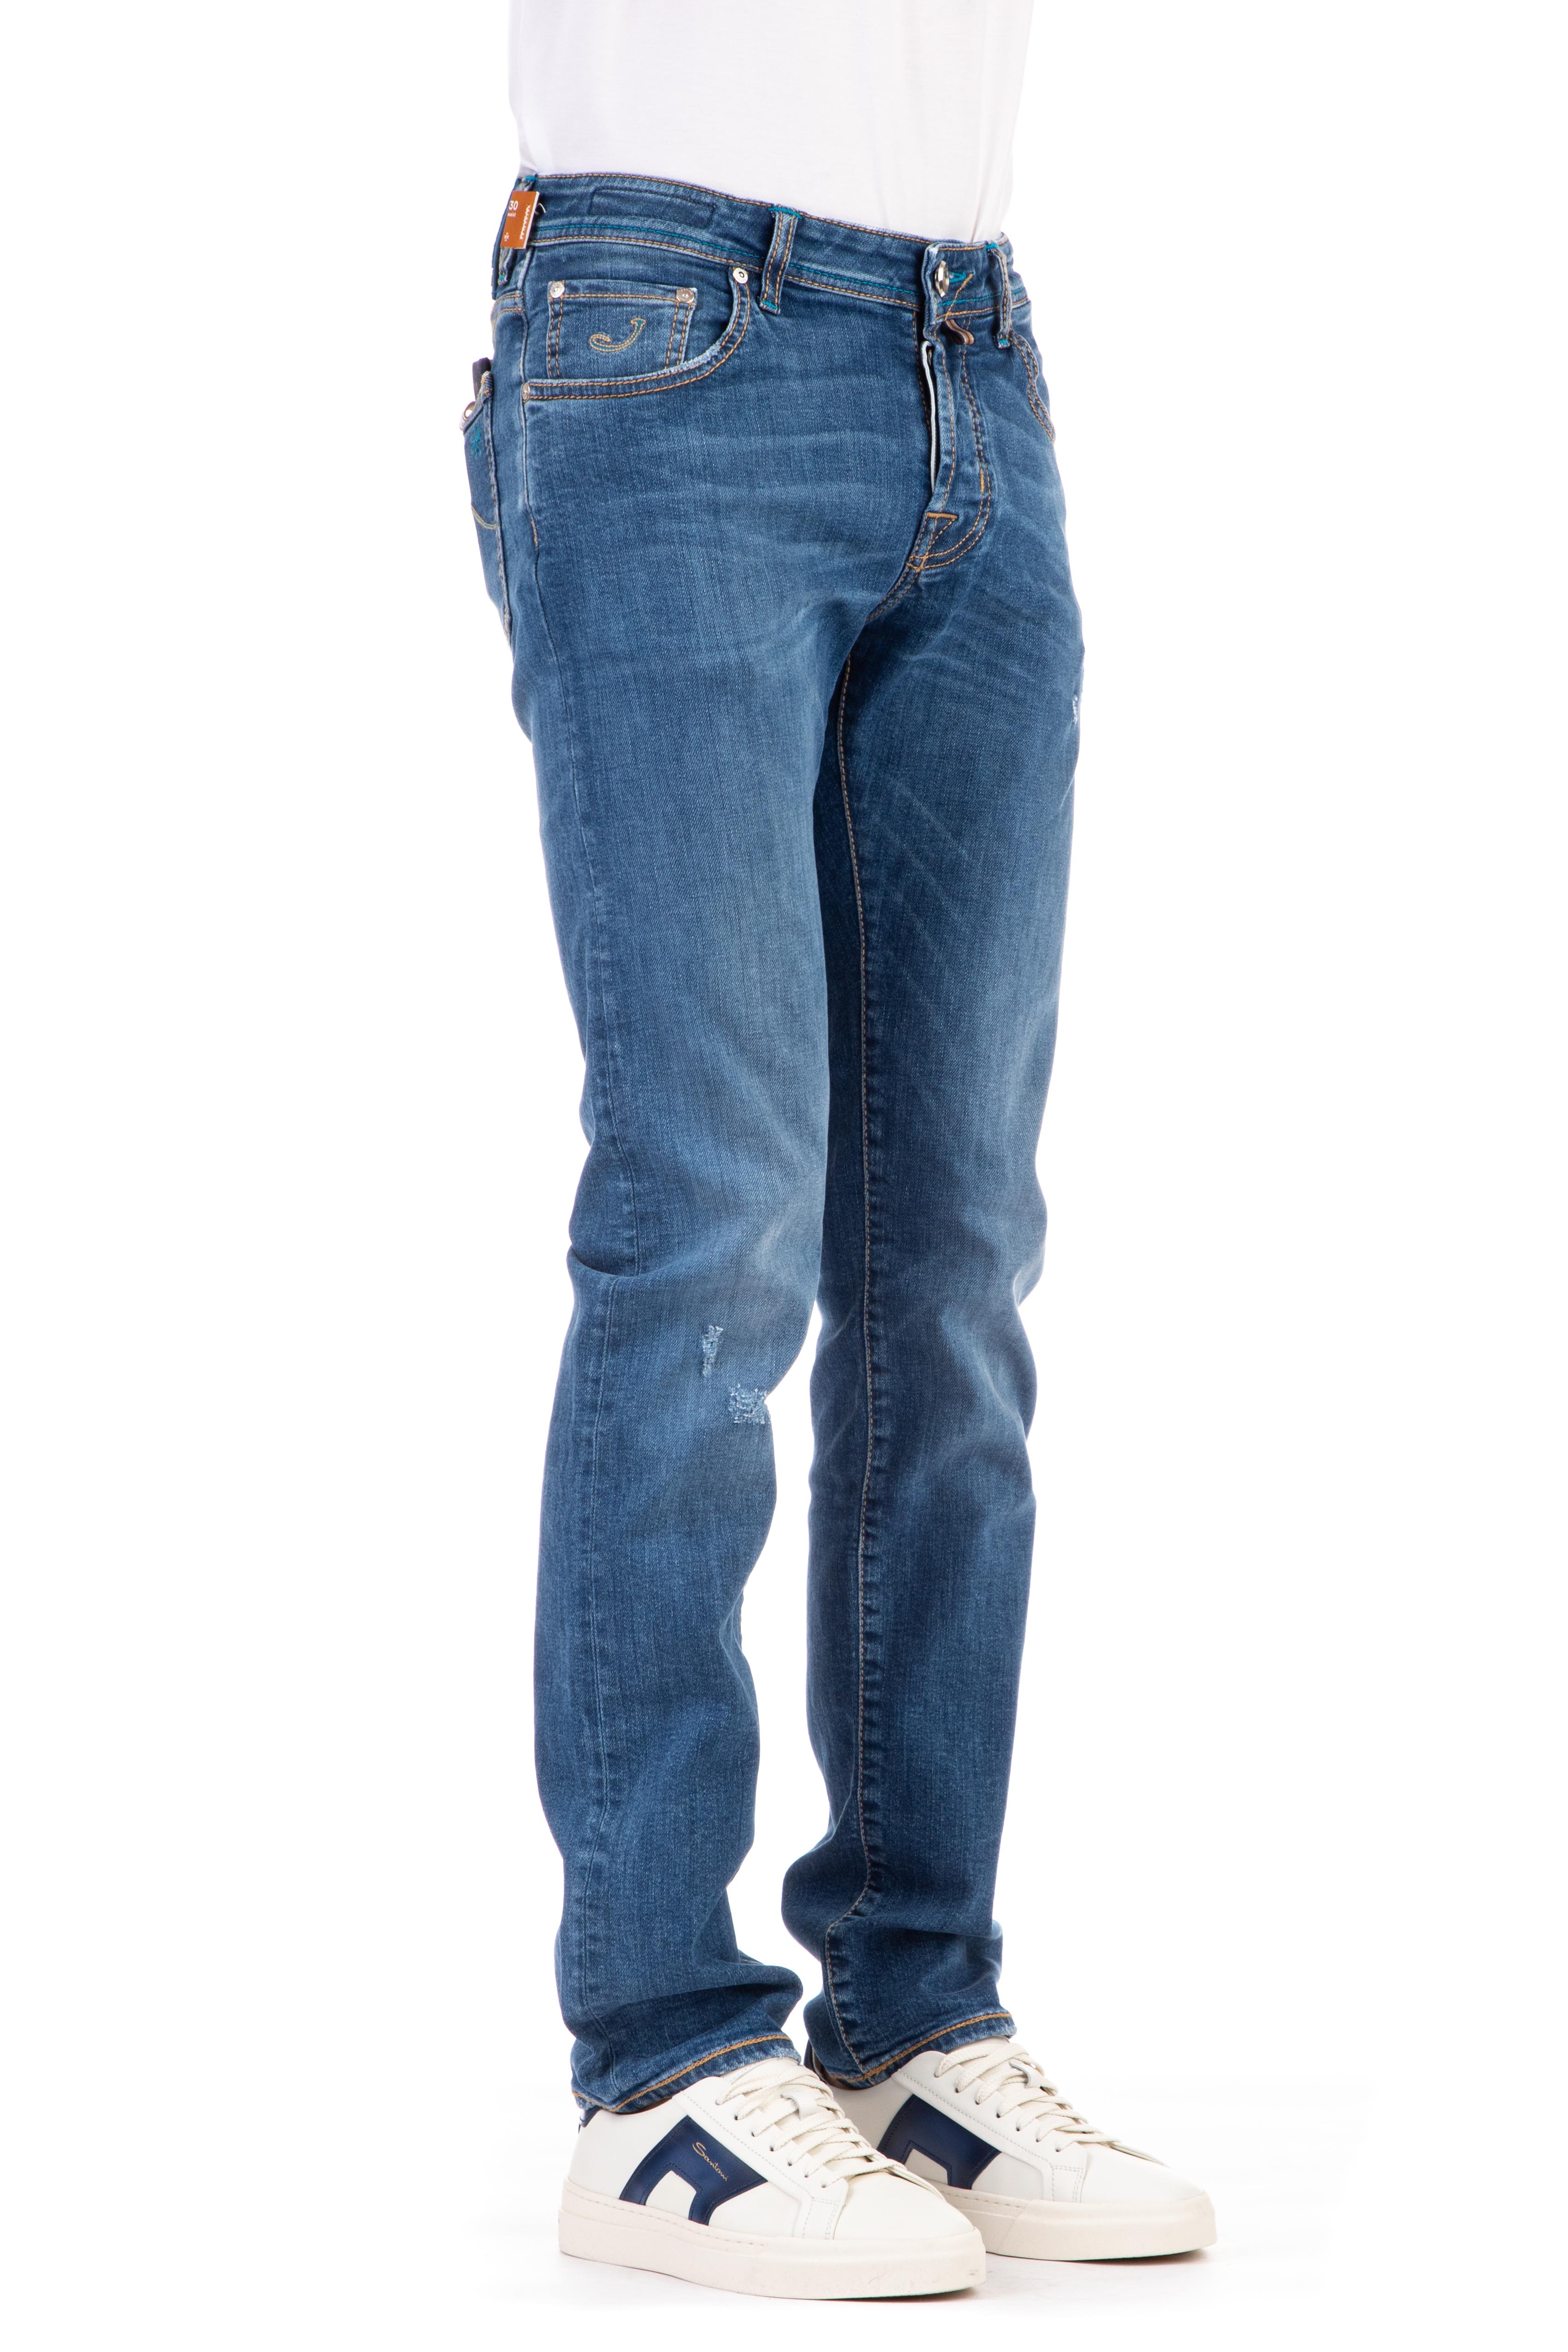 Limited edition jeans with blue label and nick fit